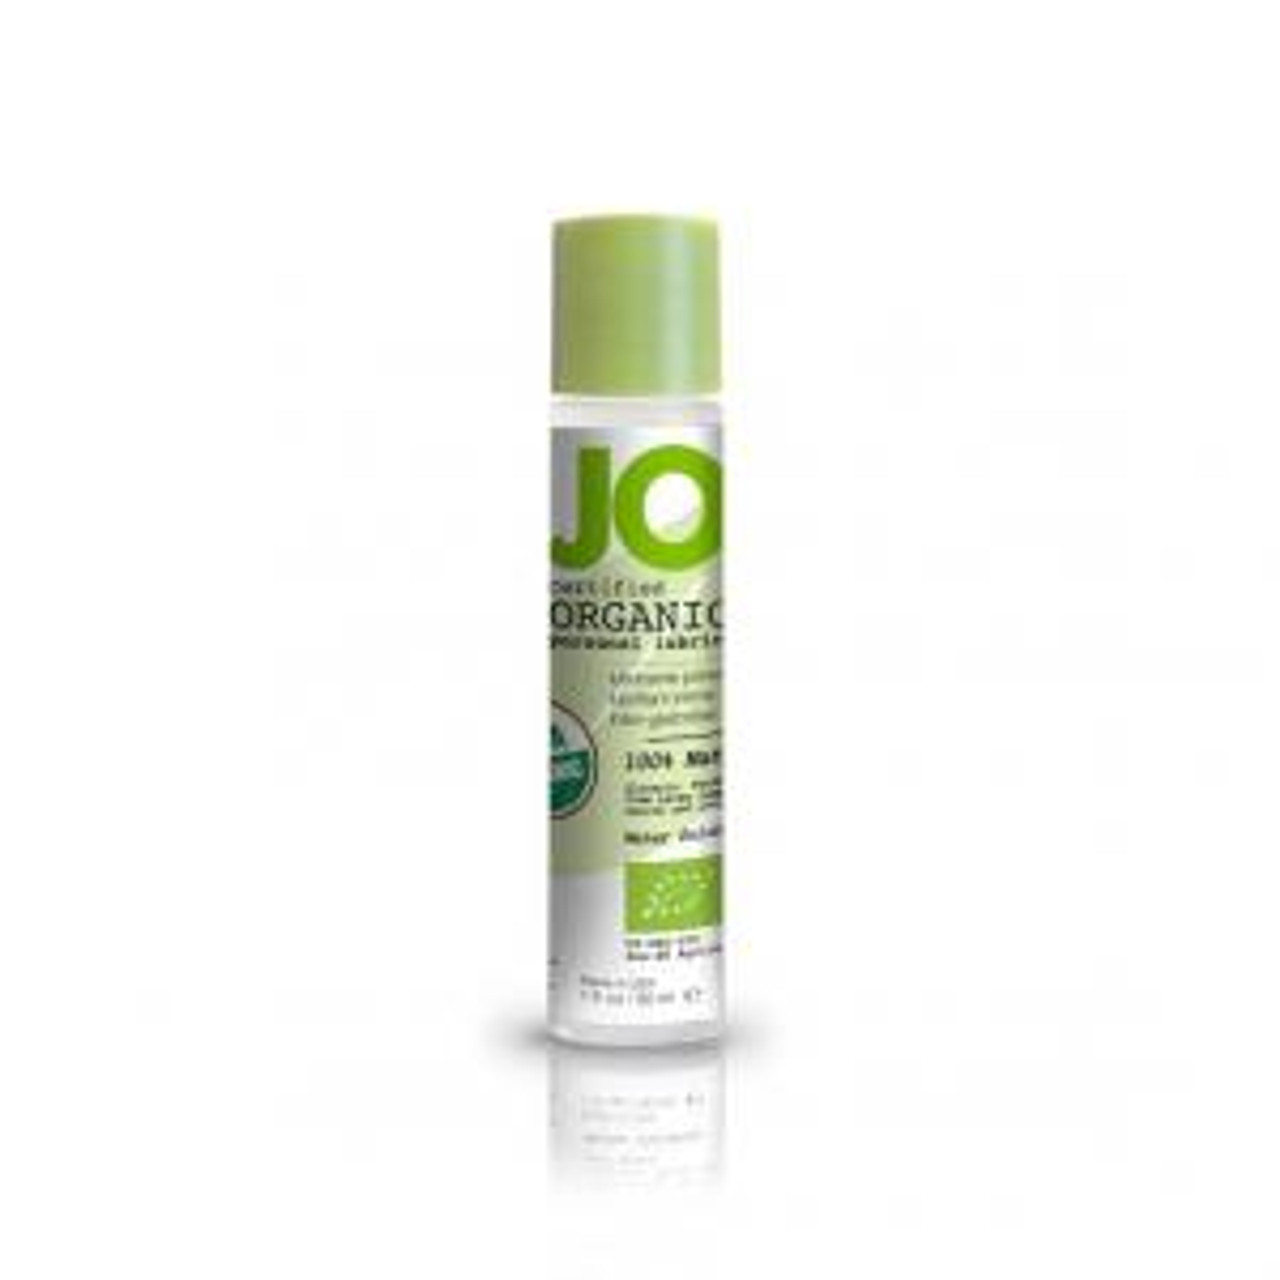 Buy System Jo Naturalove Natural Organic Personal Lubricant Online | CondomsFast